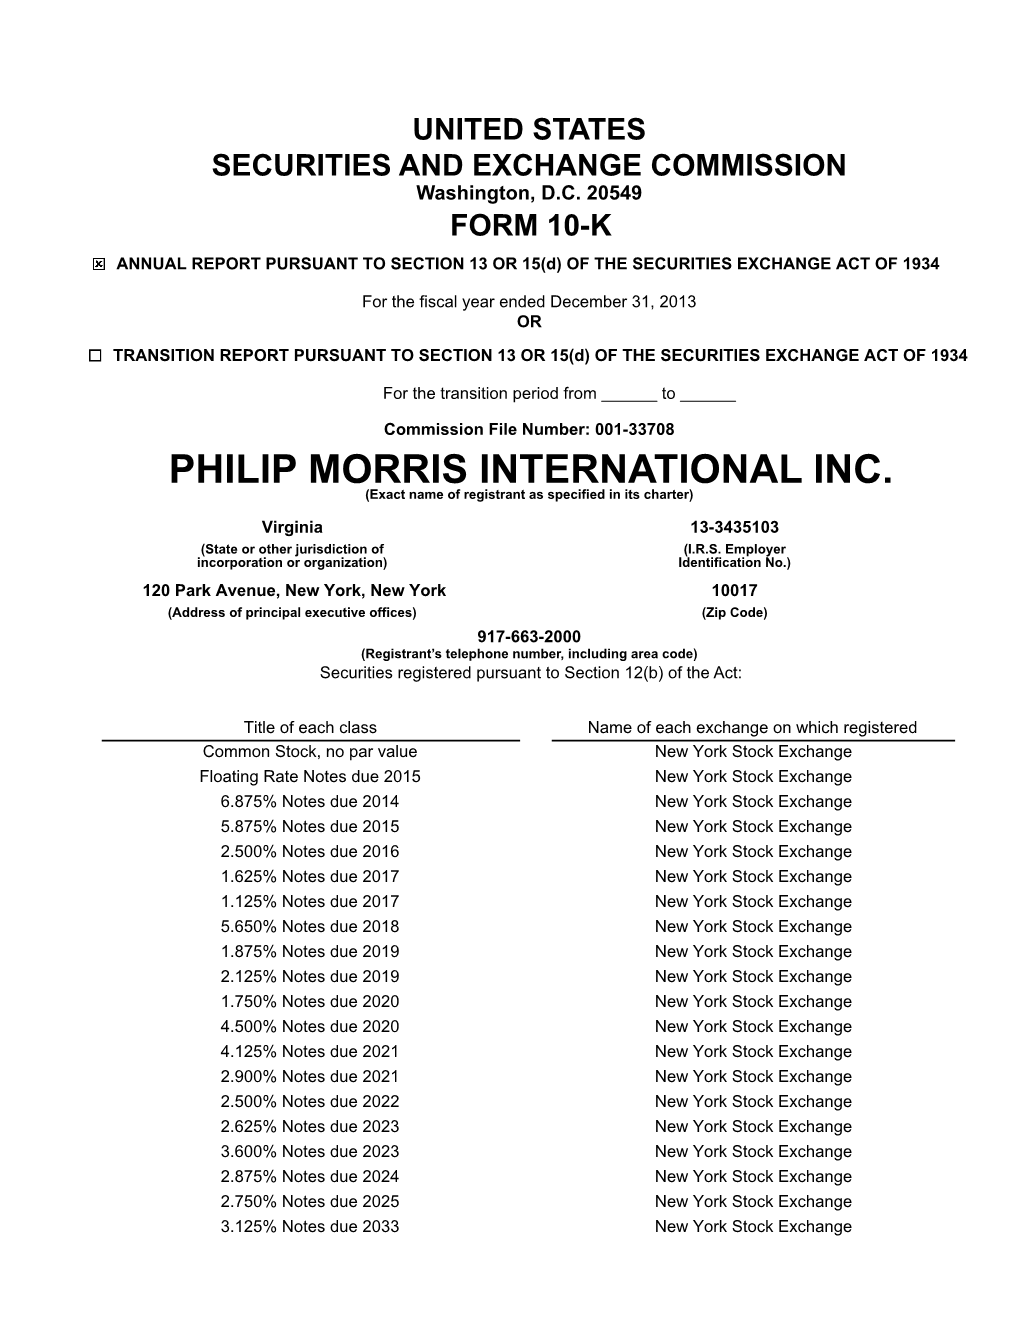 PHILIP MORRIS INTERNATIONAL INC. (Exact Name of Registrant As Specified in Its Charter)